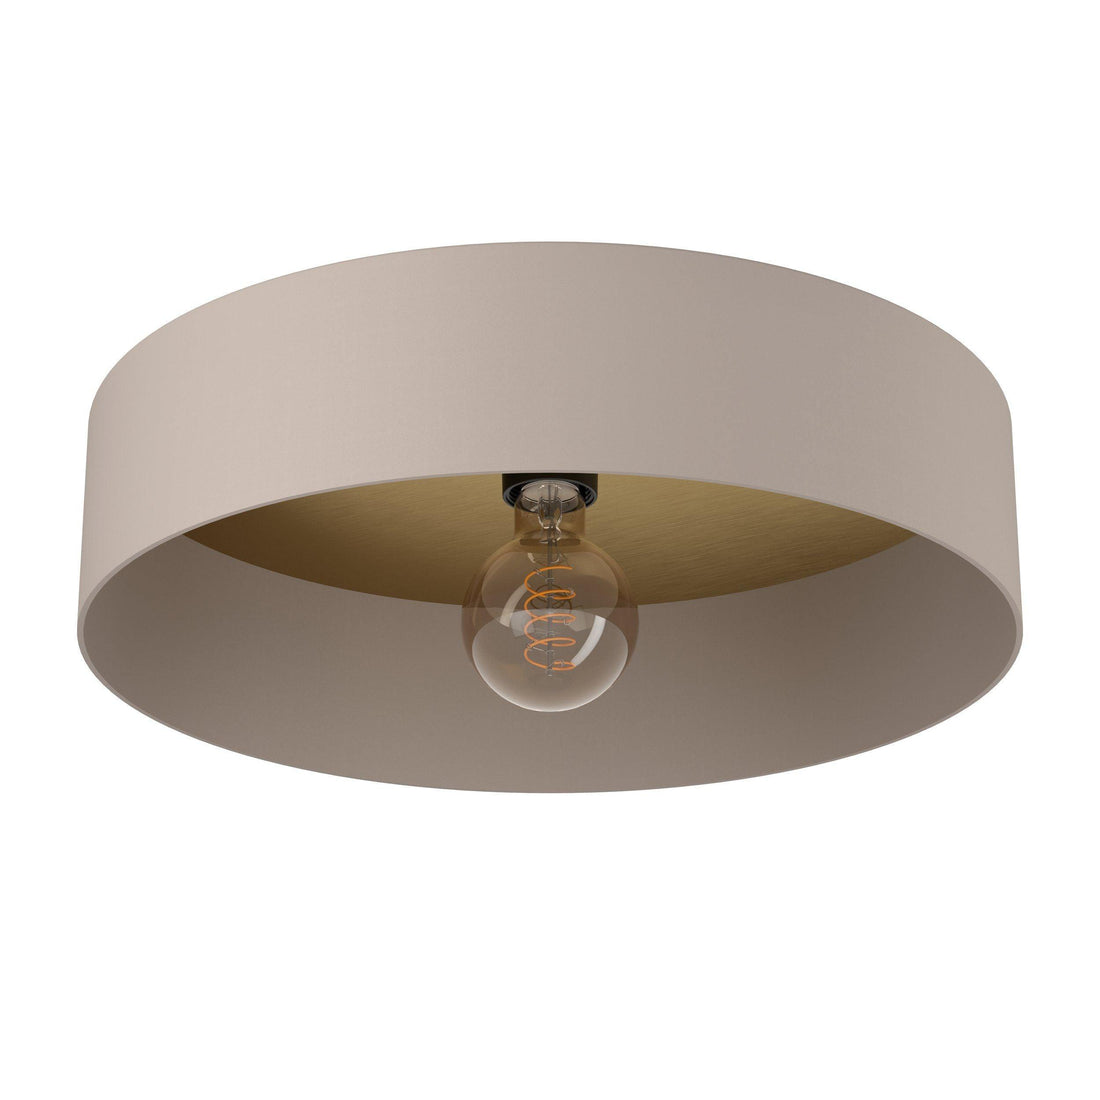 DUAIA ceiling light by The Light Library